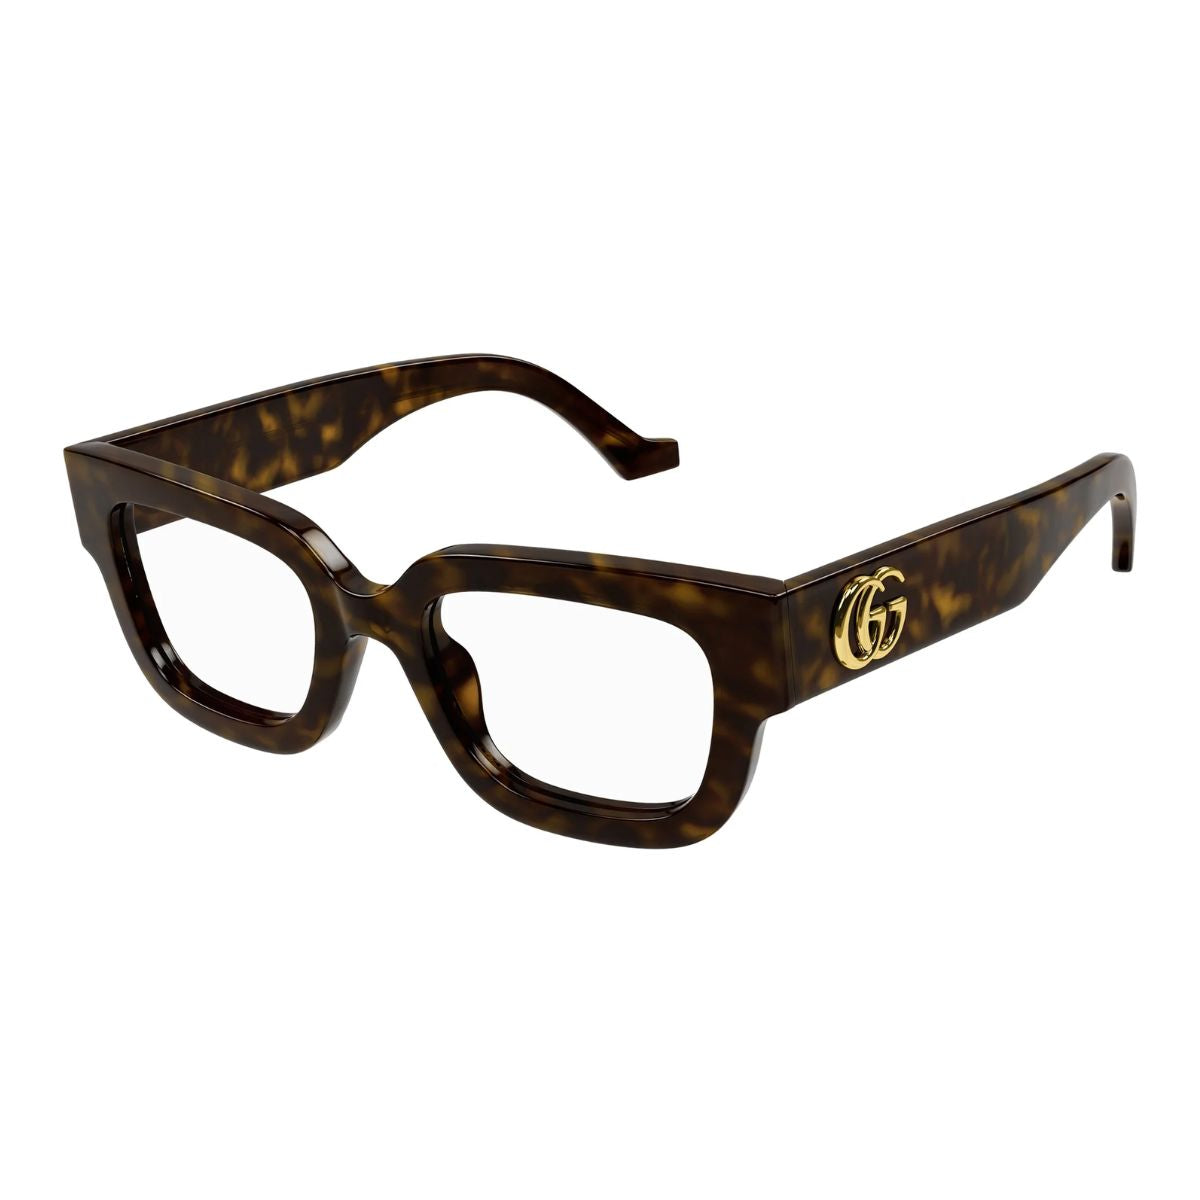 "Discover Top 5 Stylish Gucci Frames for Women - Optorium Eyewear Selection"